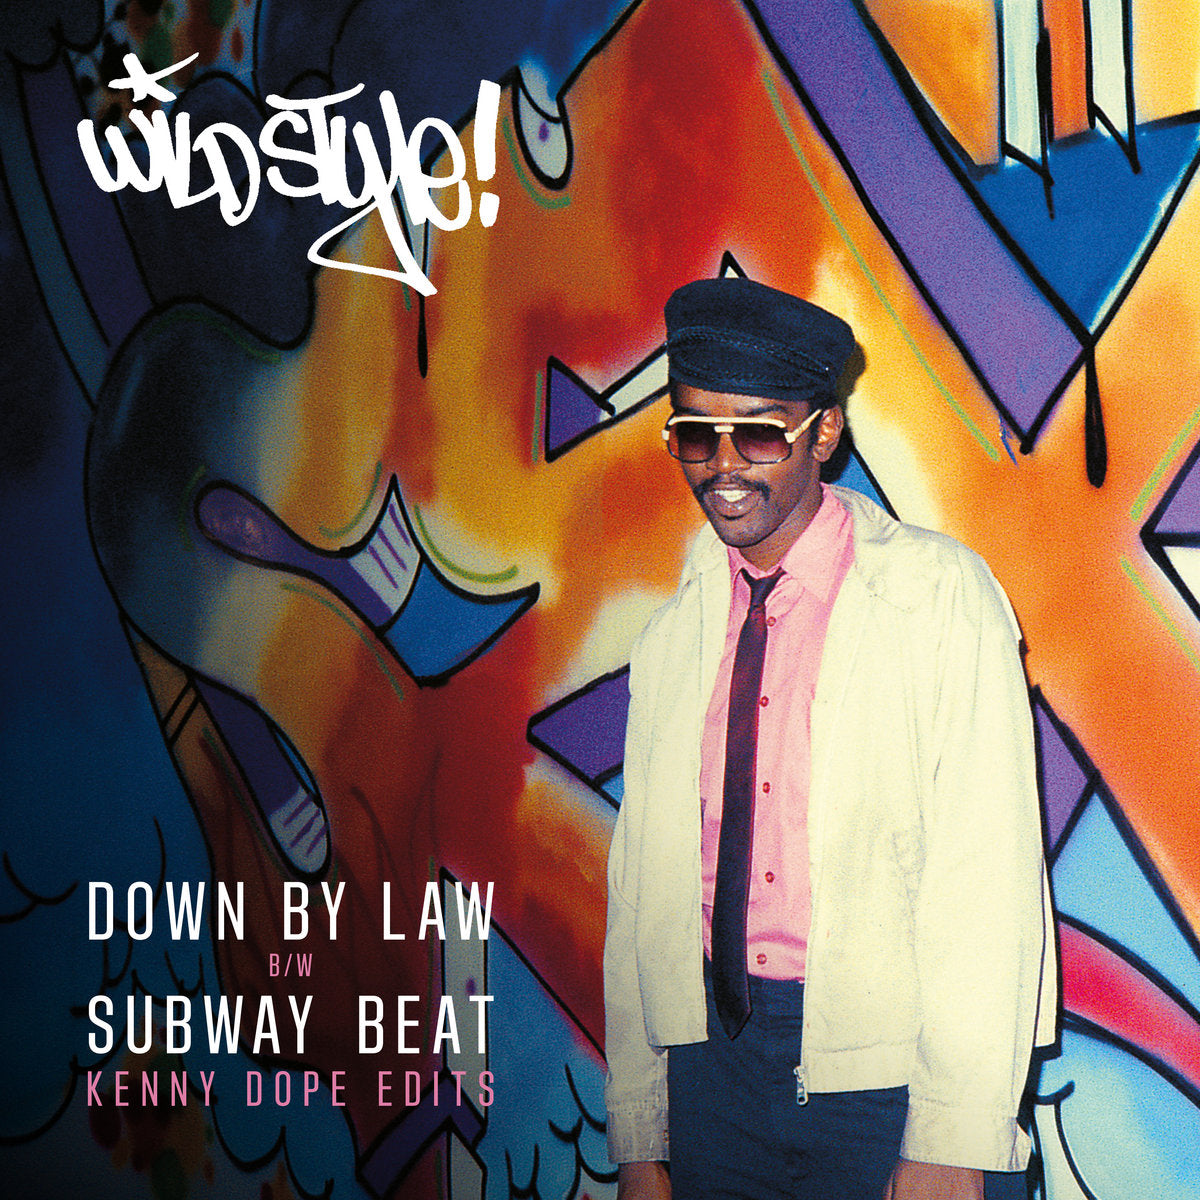 Down By Law / Subway Beat (Kenny Dope Edit)